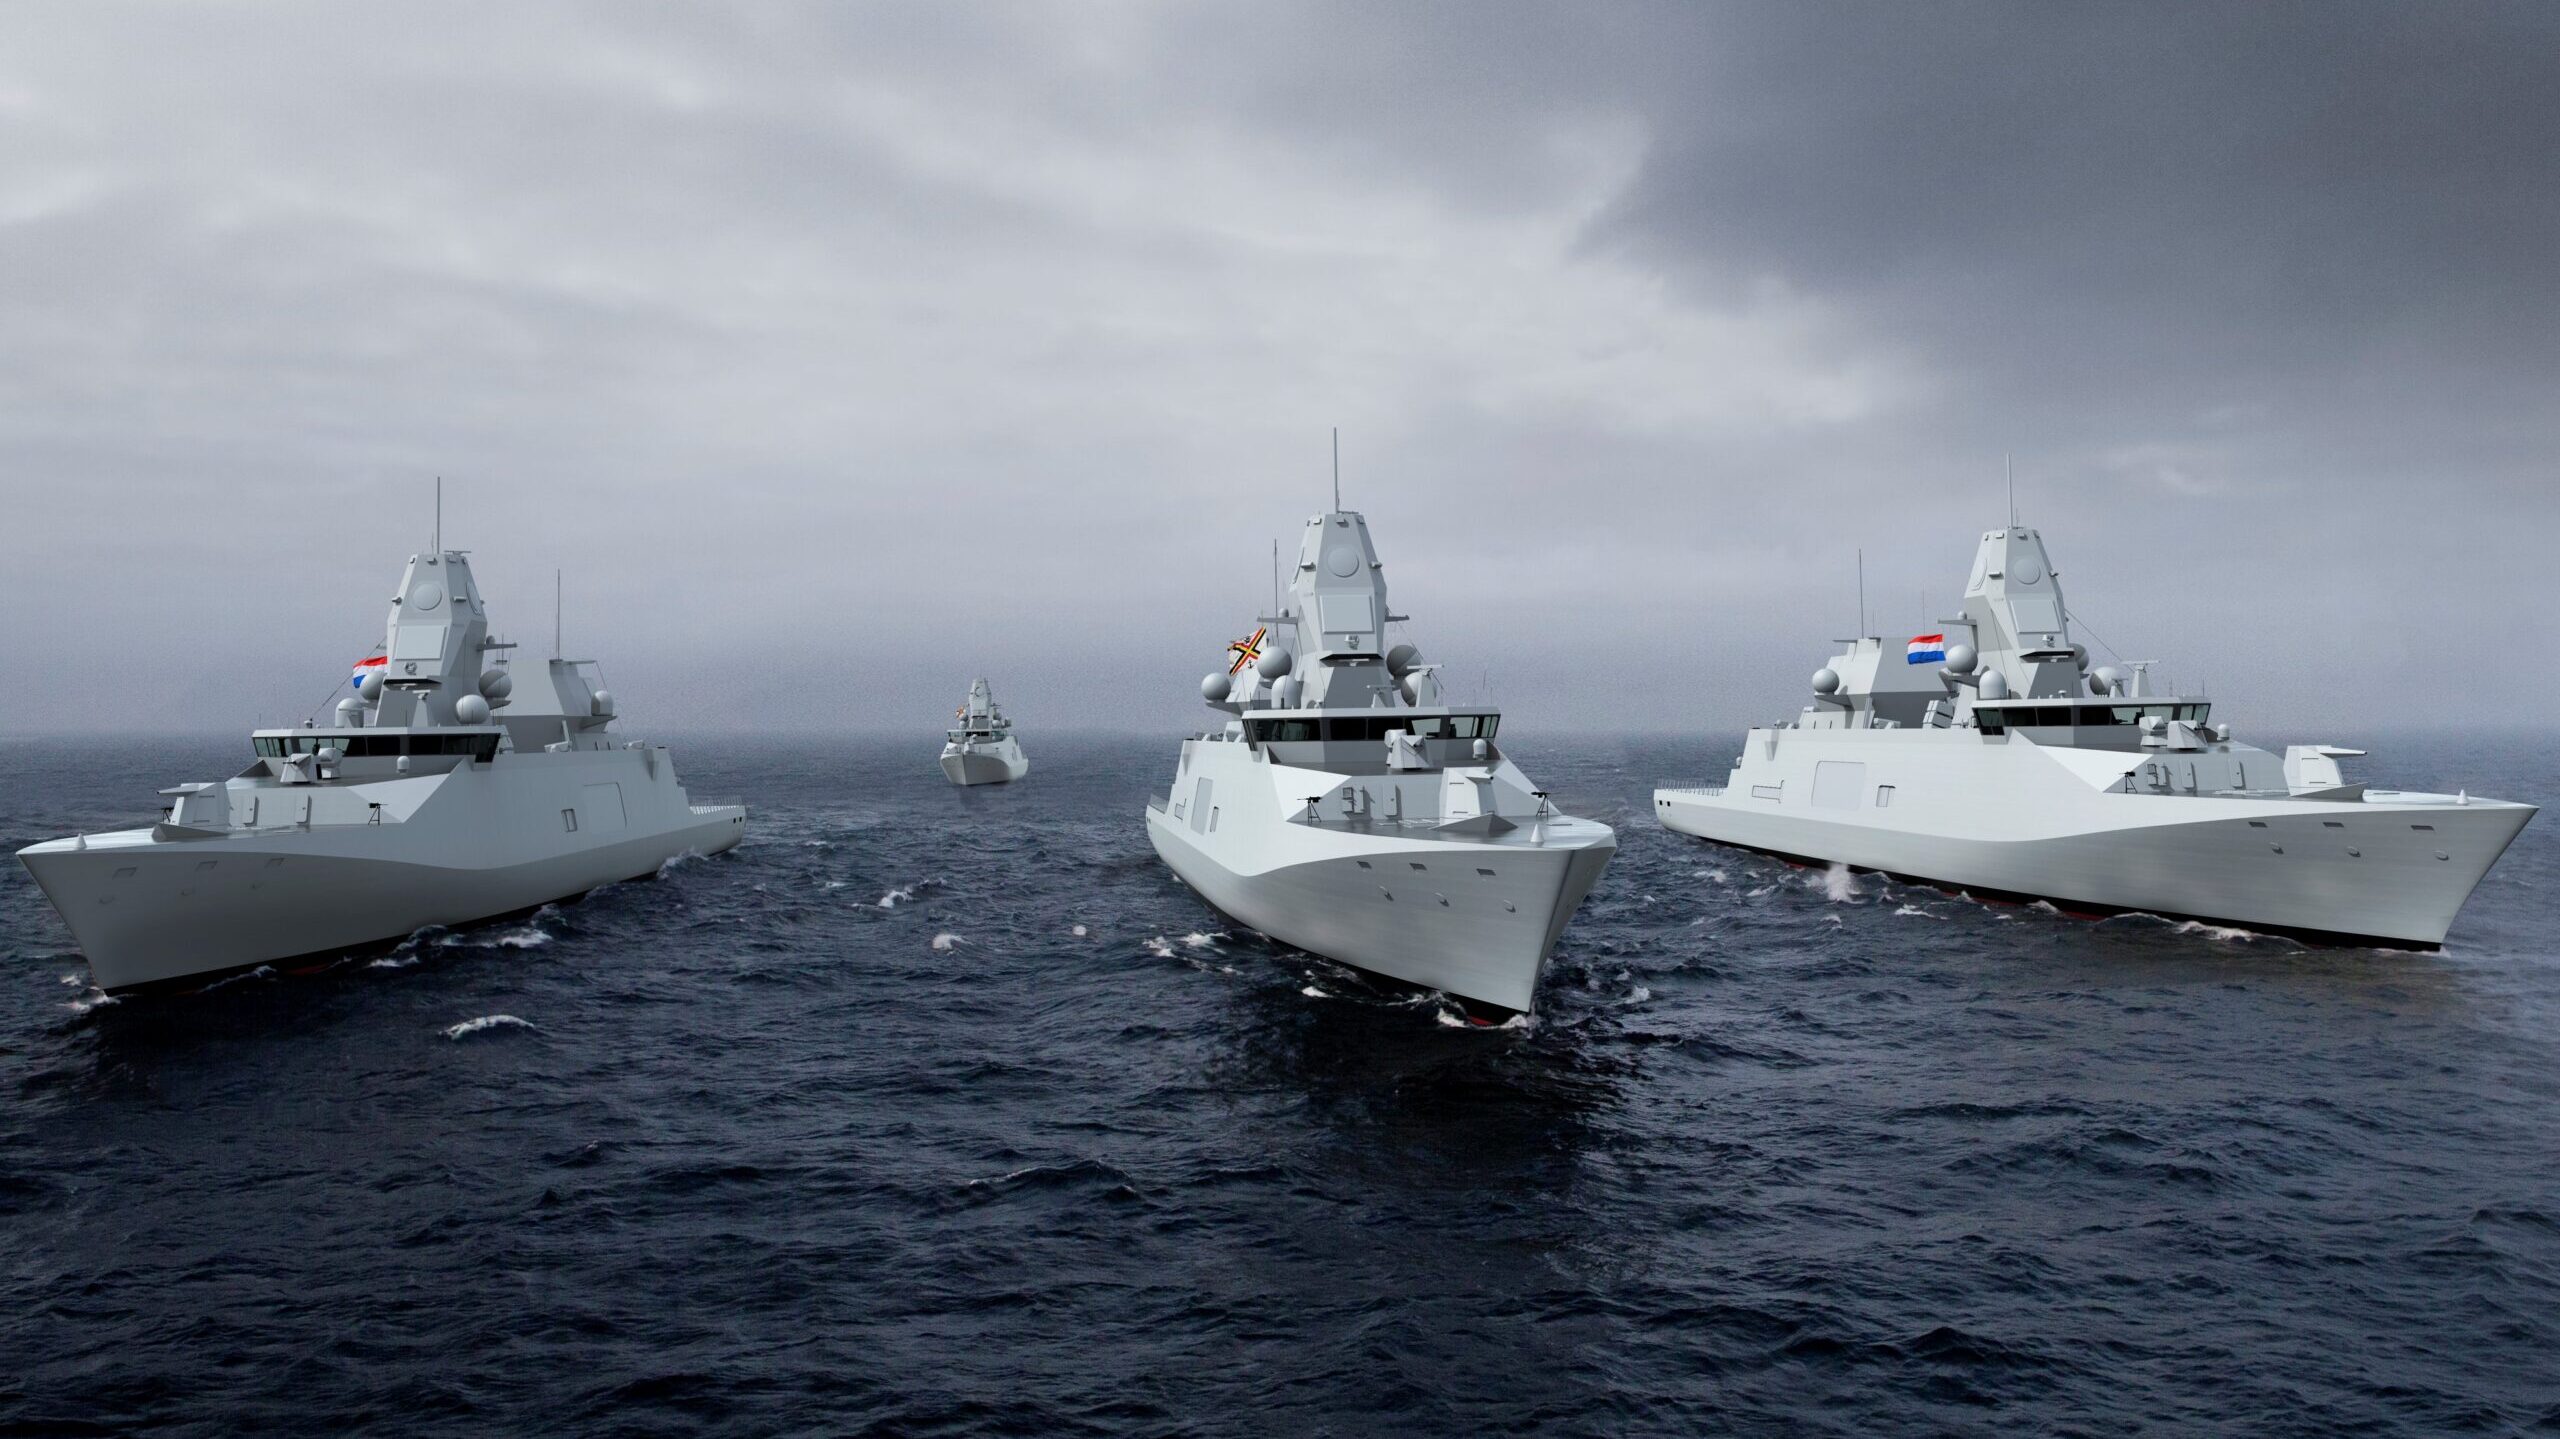 Netherlands and Belgium agree $4.4 billion deal for 4 ASW Frigates